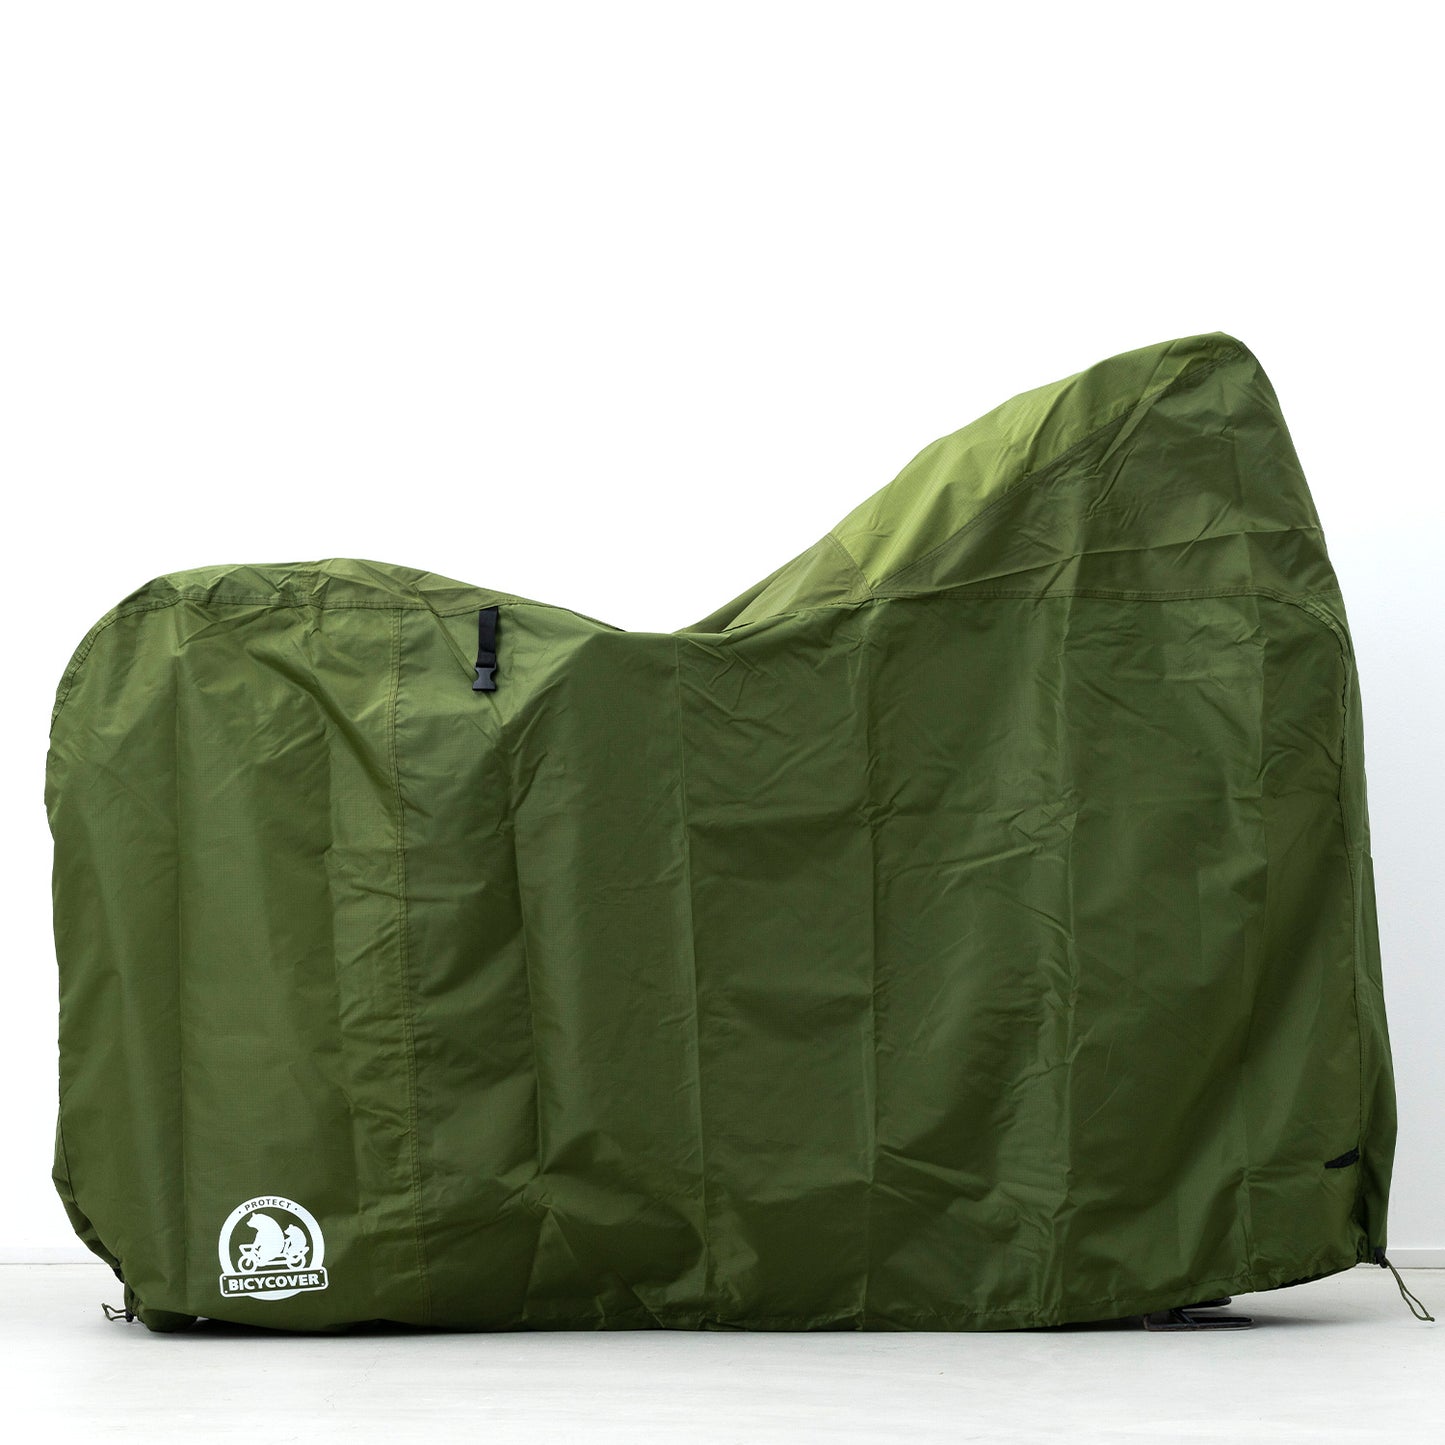 BICYCOVER high spec cycle cover large size